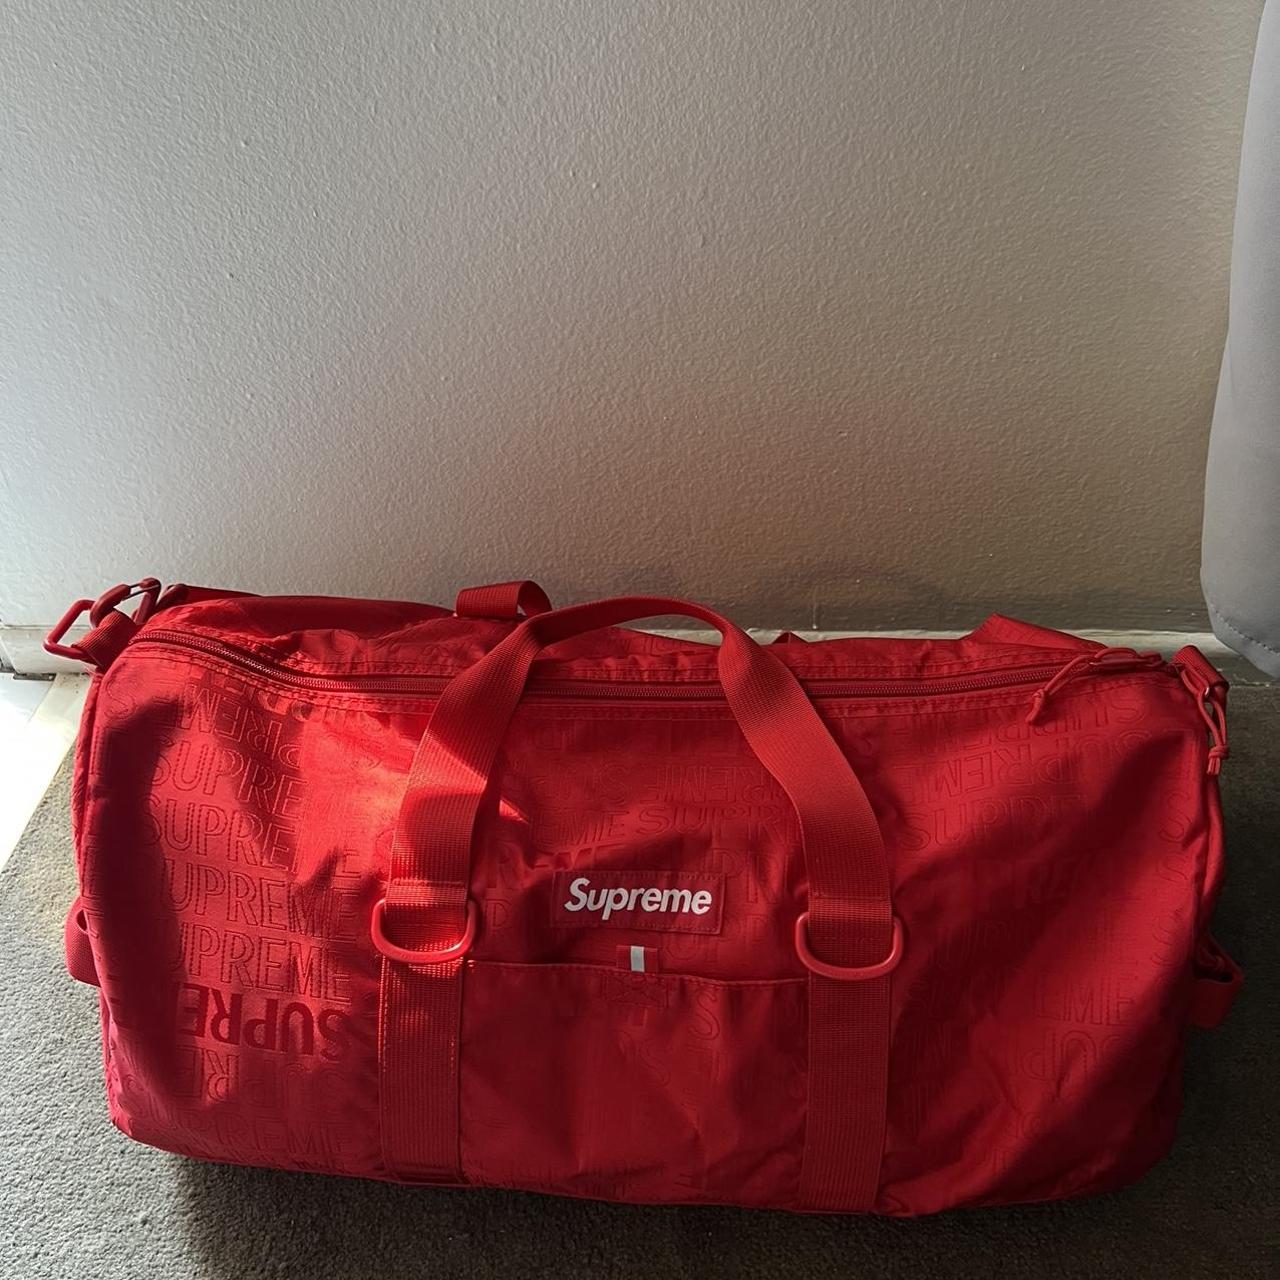 FS] Supreme SS/19 Red Duffle Bag Used only a few times. Great